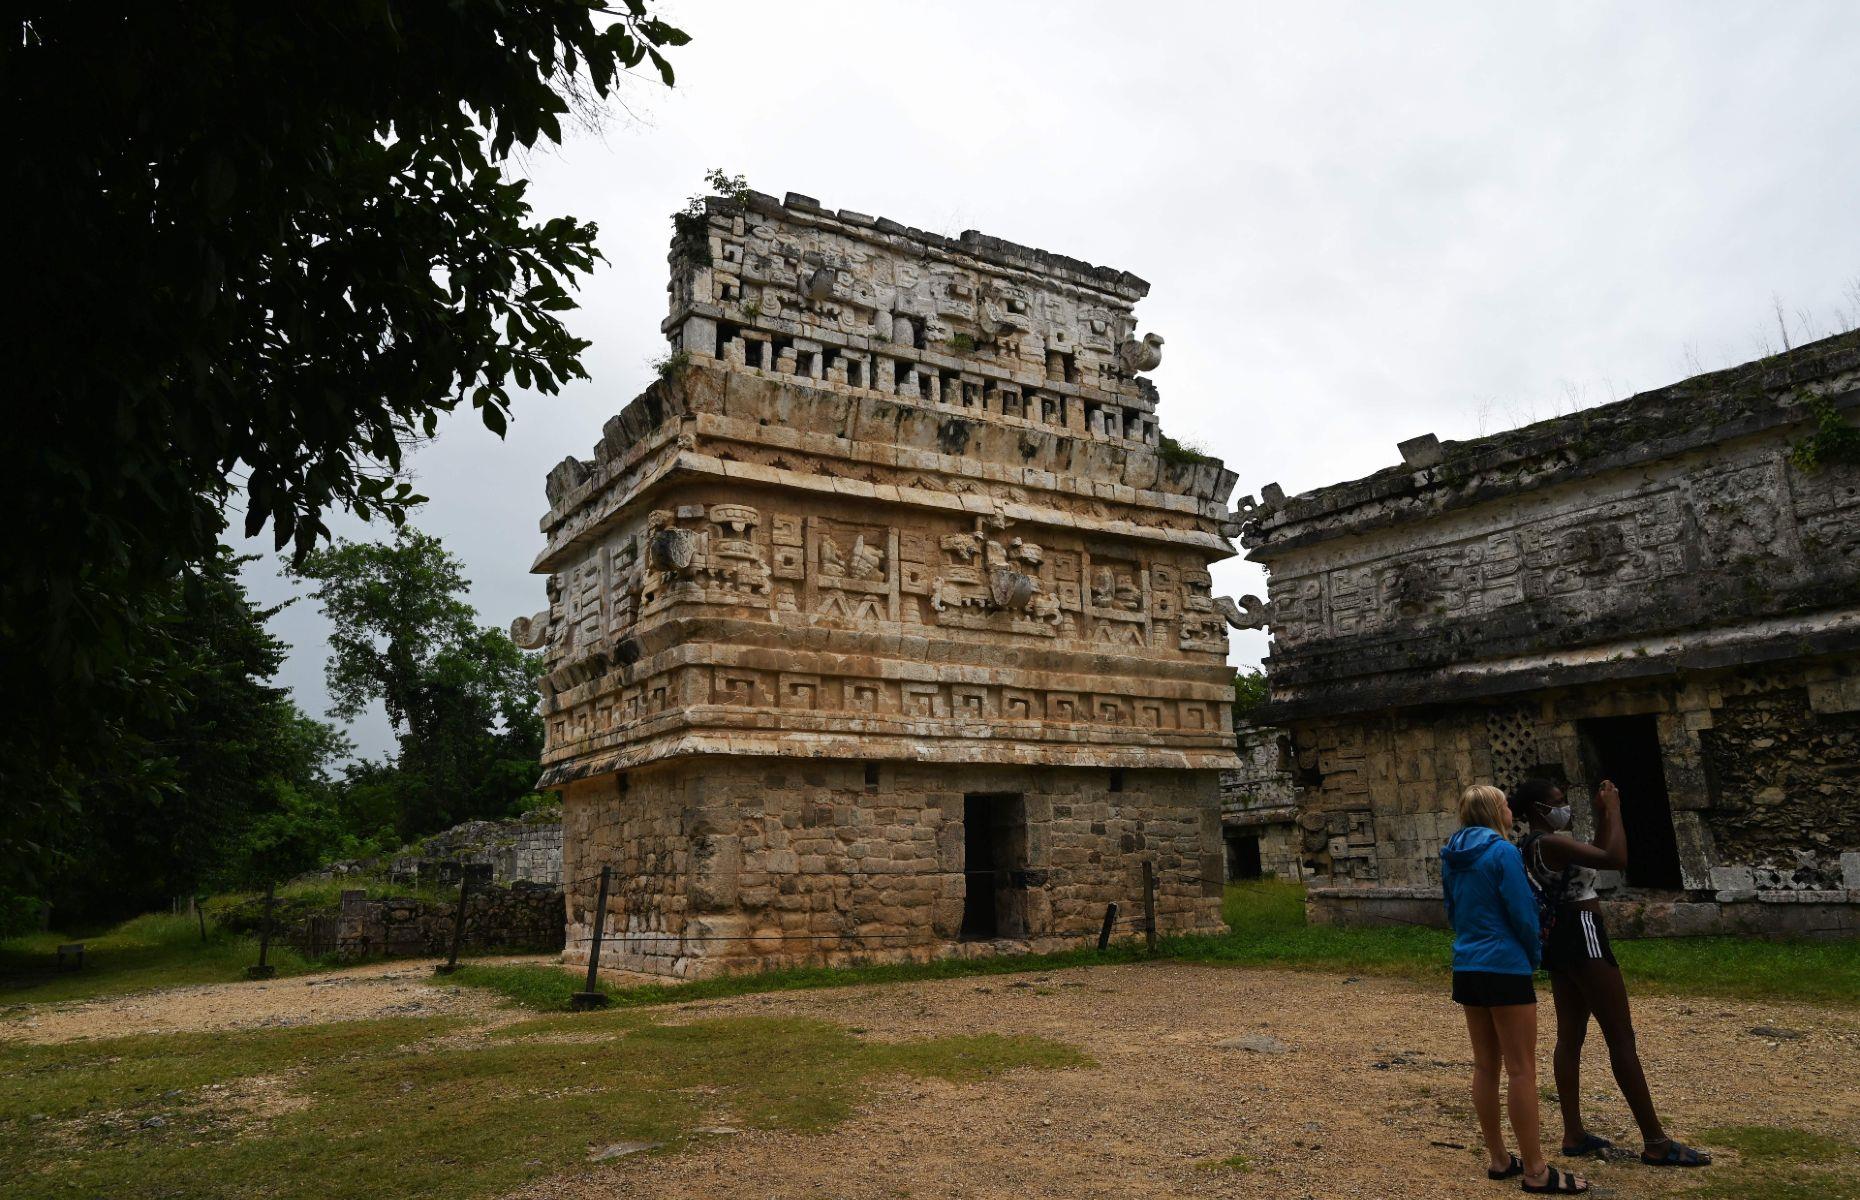 The Pre-Hispanic city has a number of impressive monuments: the pyramid-shaped El Castillo; the Temple of the Warriors; and the Ball Court, an ancient sports arena. And archaeologists are still making more discoveries today. In 2016, researchers found a smaller pyramid inside El Castillo using imaging technology, cementing the idea that the pyramid was built in a nesting-doll formation. The popular site typically draws in around two million visitors annually.